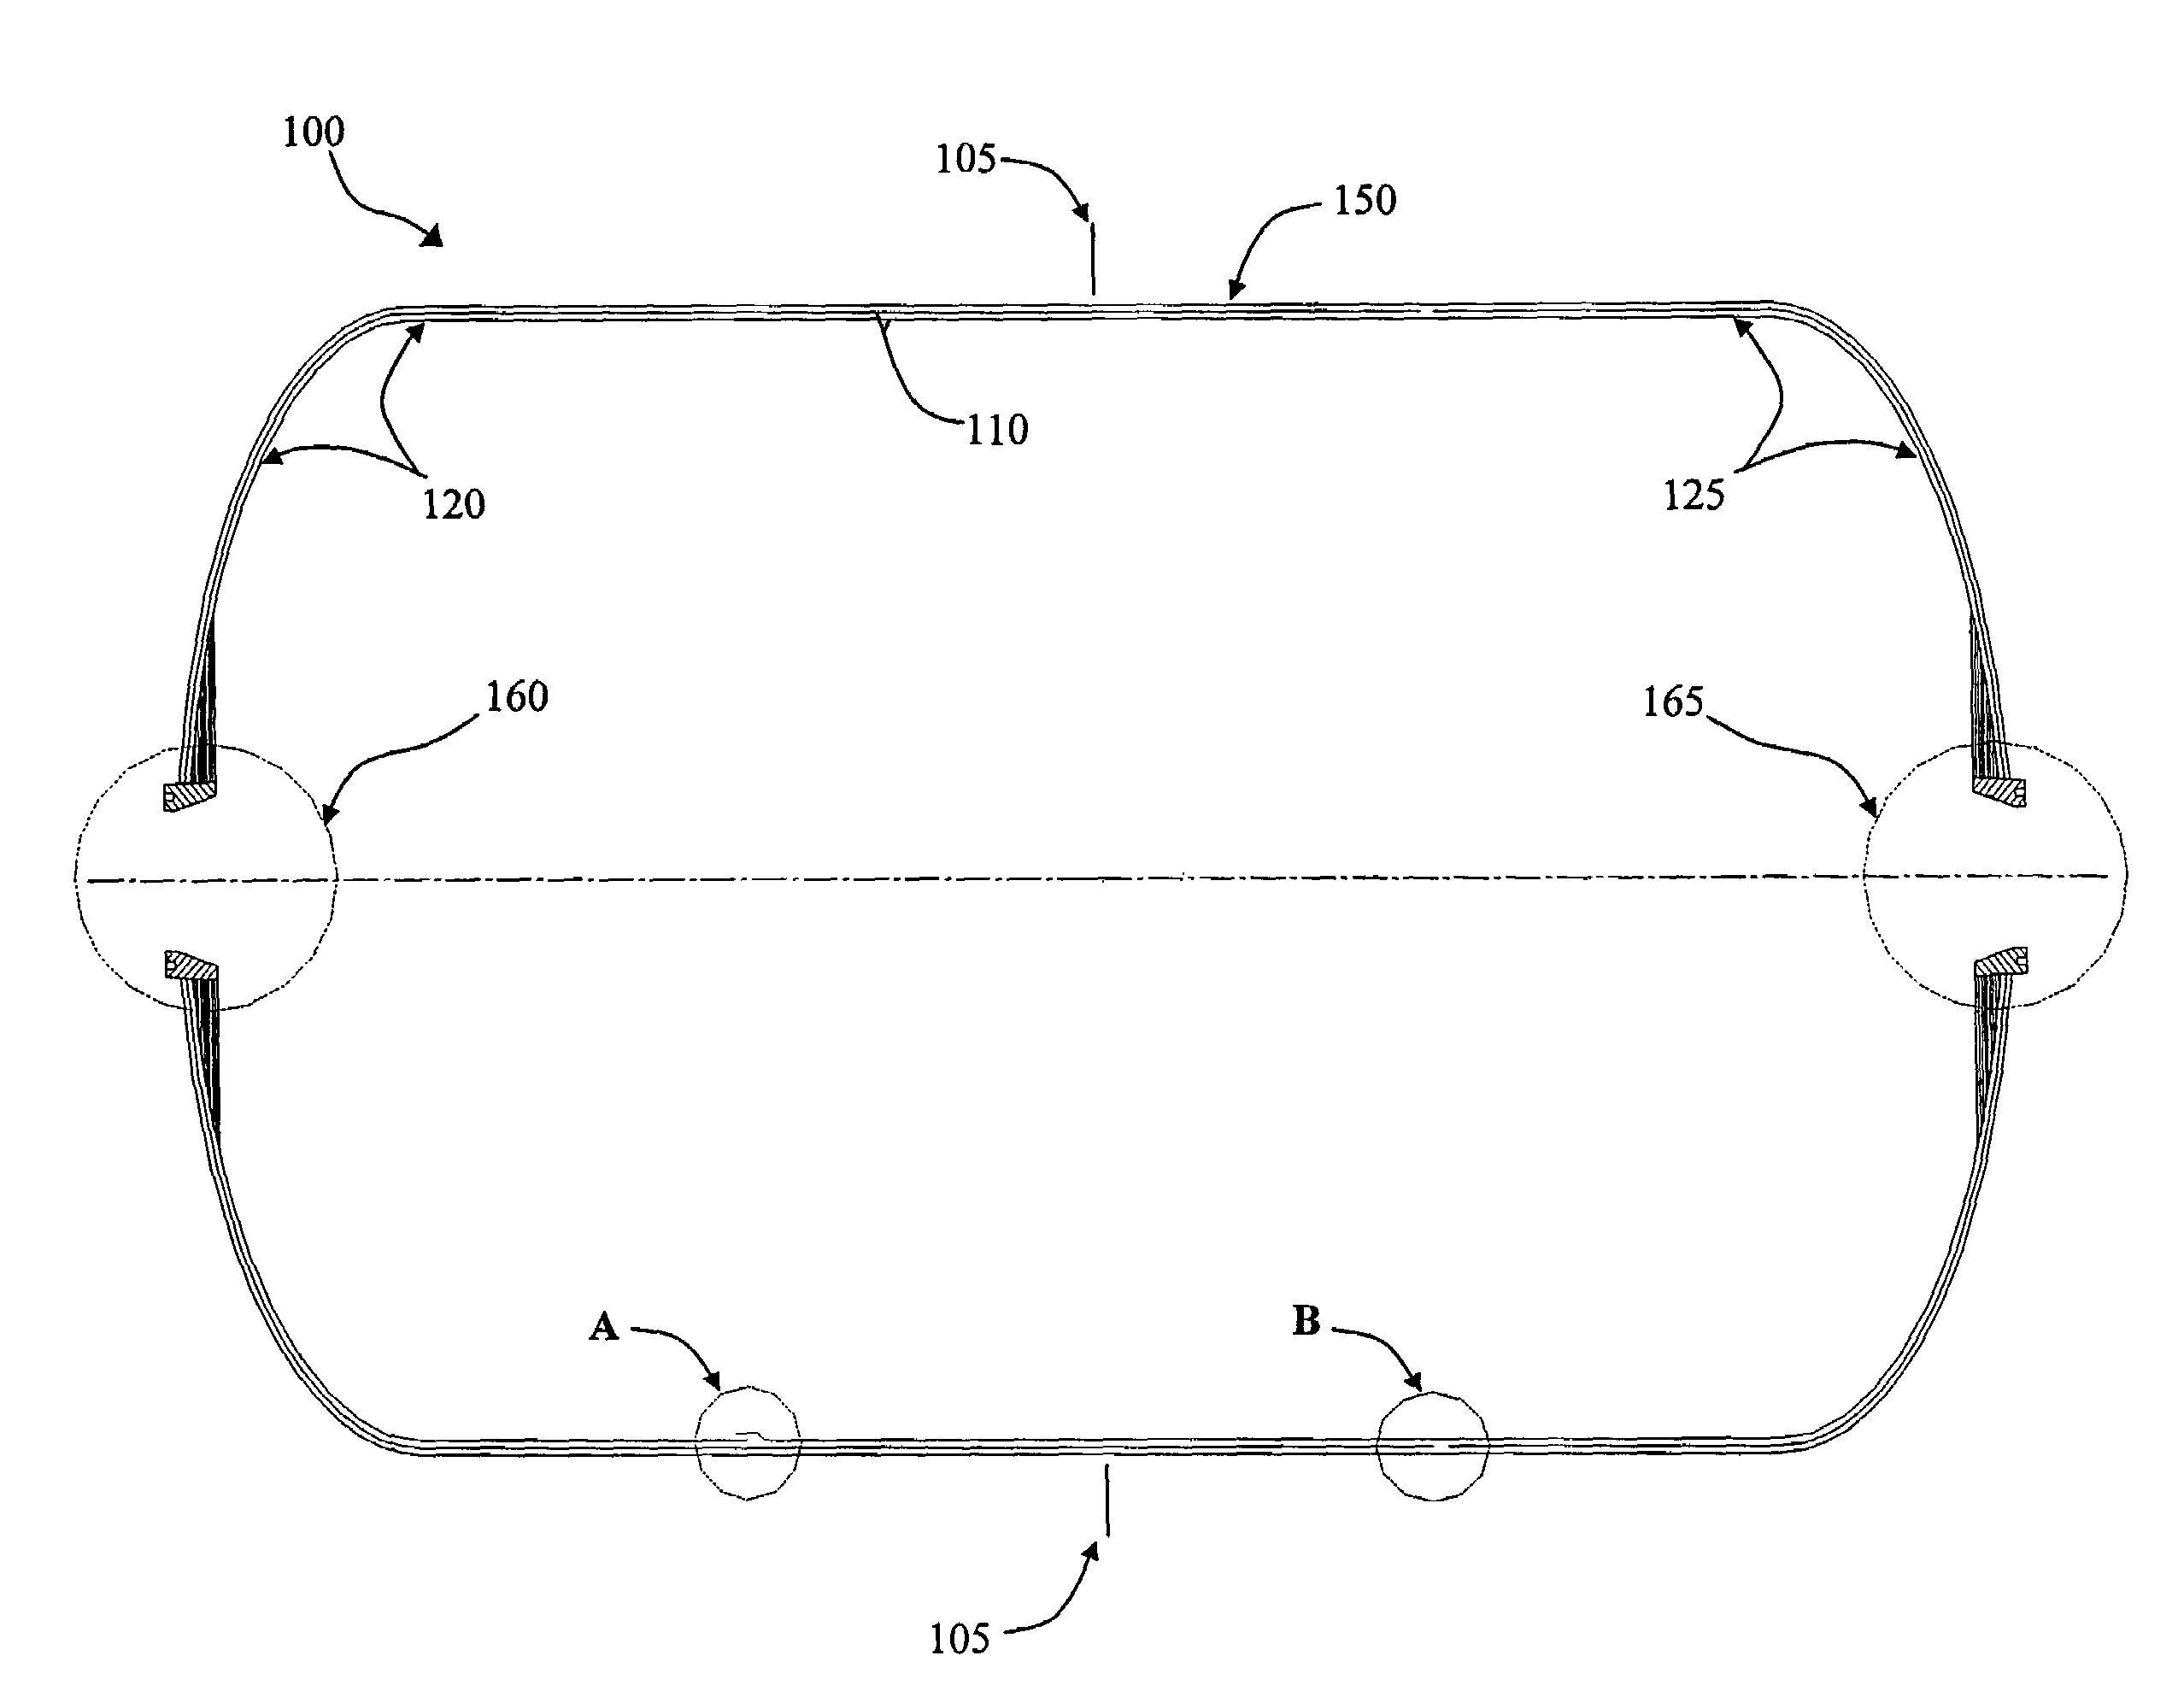 Composite cryogenic propellant tank including an integrated floating compliant liner